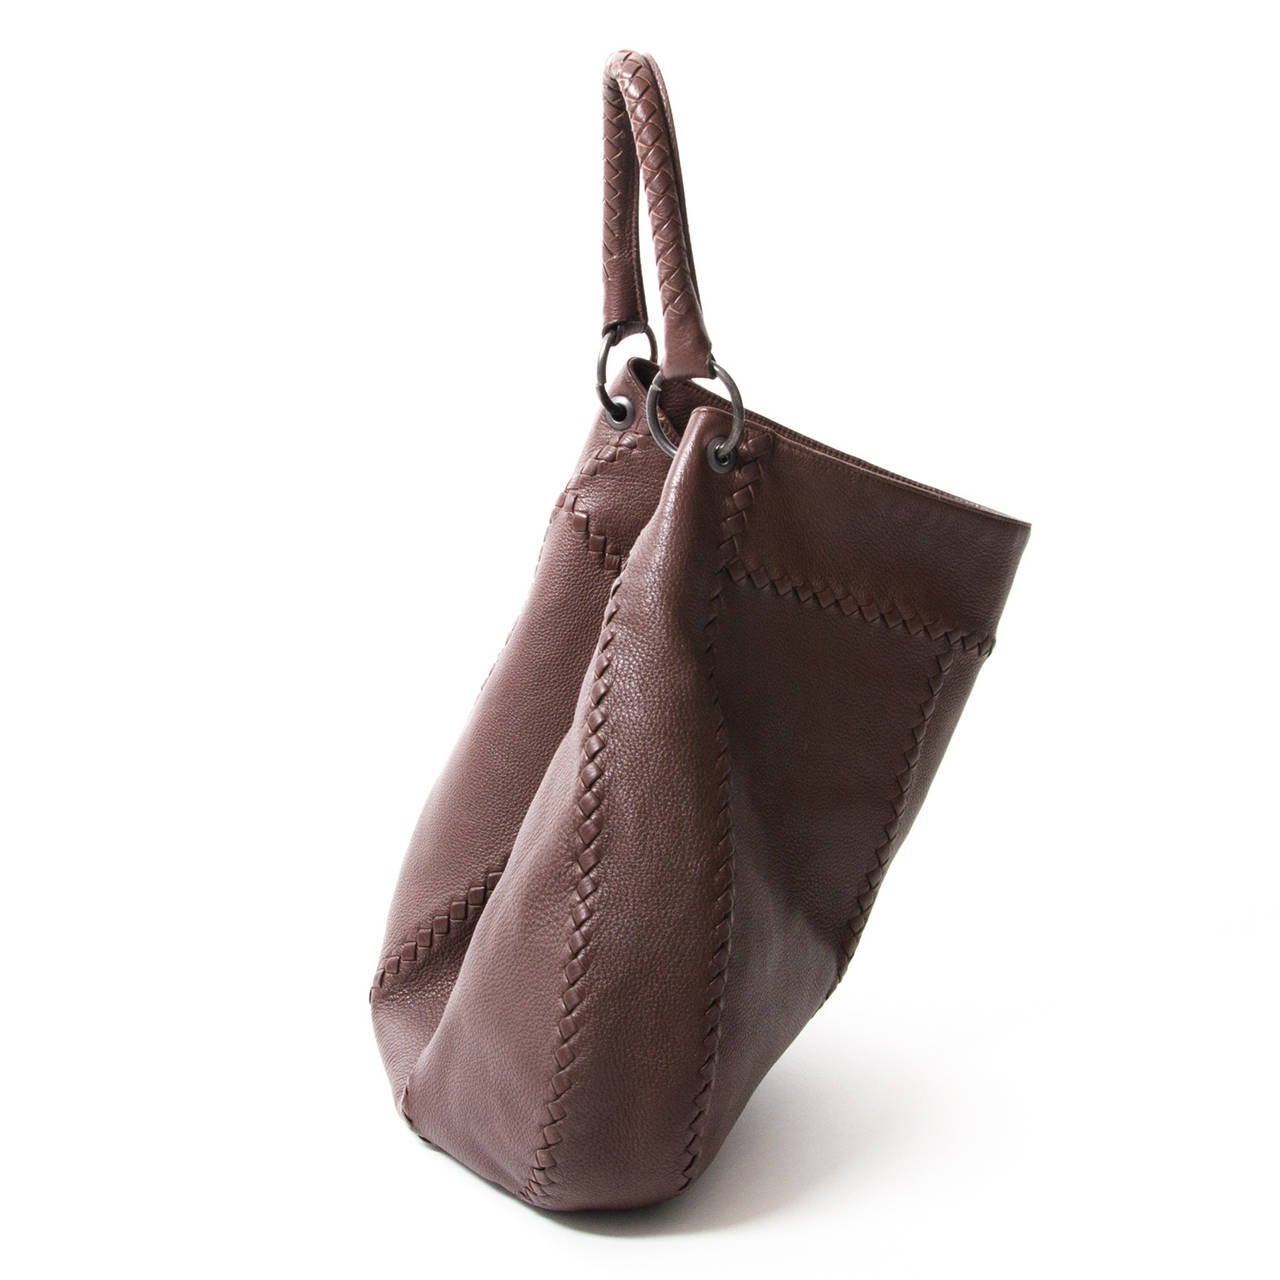 Simple but elegant looking. The luxurious leather design is accentuated an artisan braided shoulder strap and trim has super-soft suede lining.

It has a single braided shoulder strap, internal zip pockets and women would never worry about room